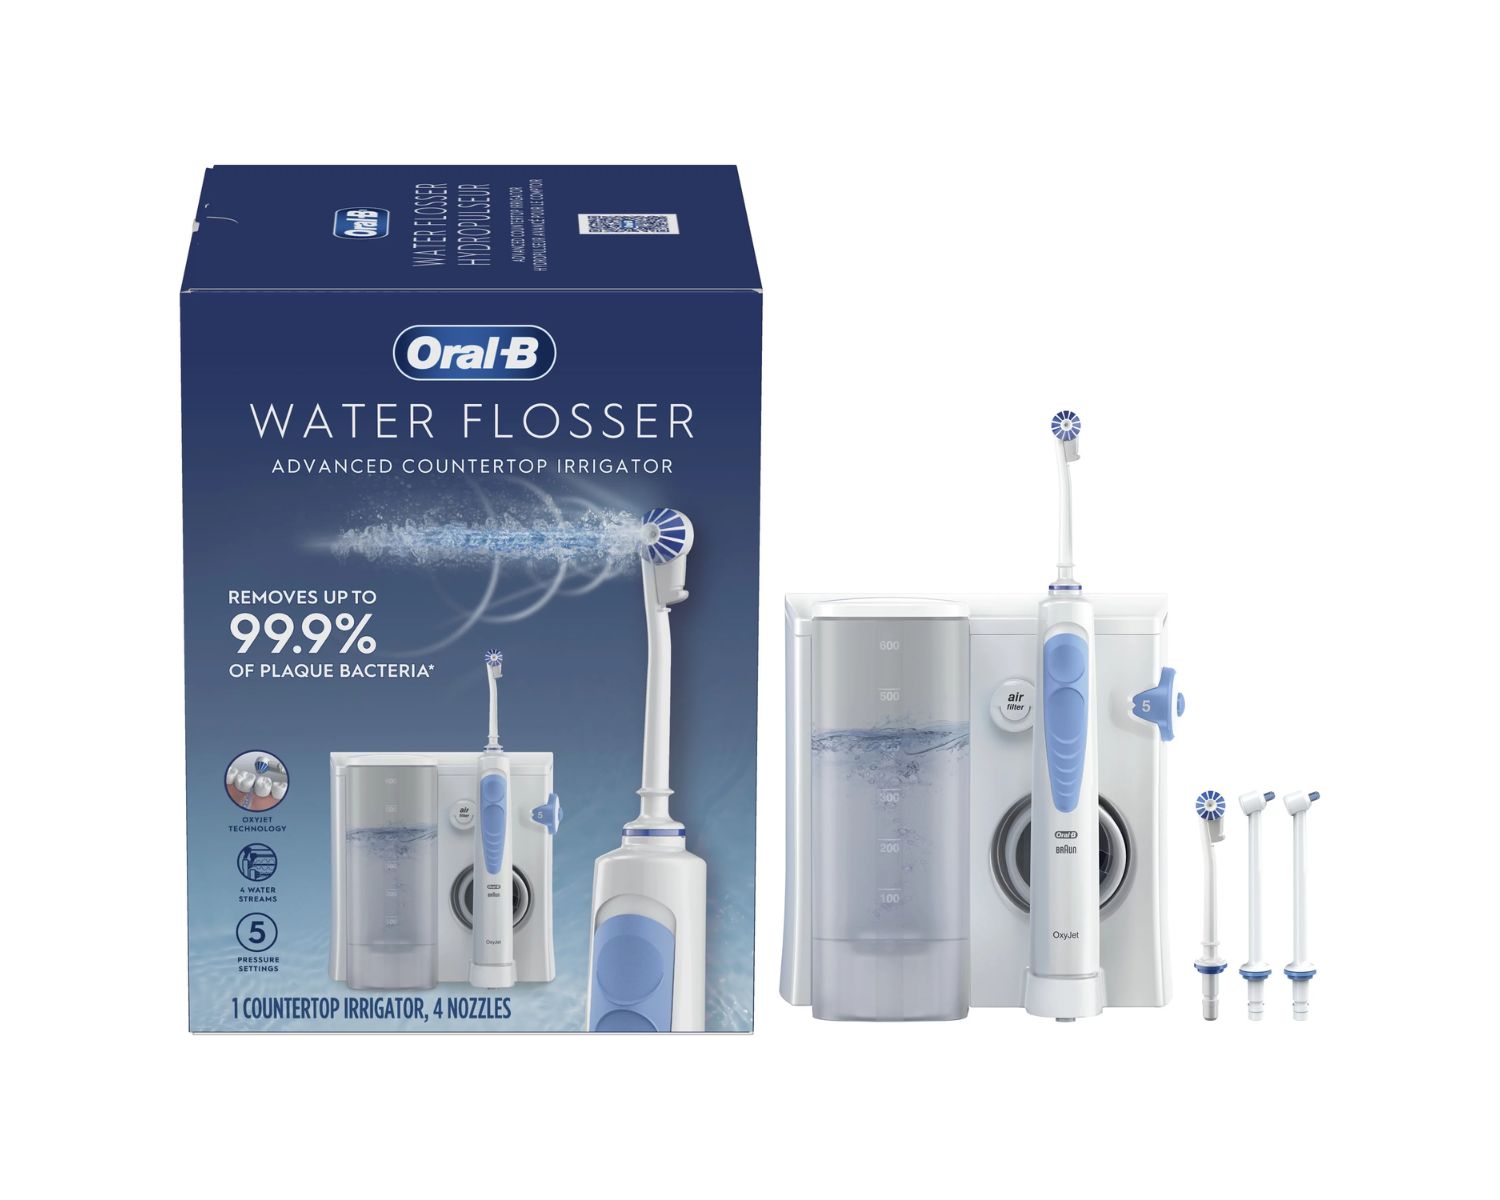 How To Use An Oral-B Water Flosser